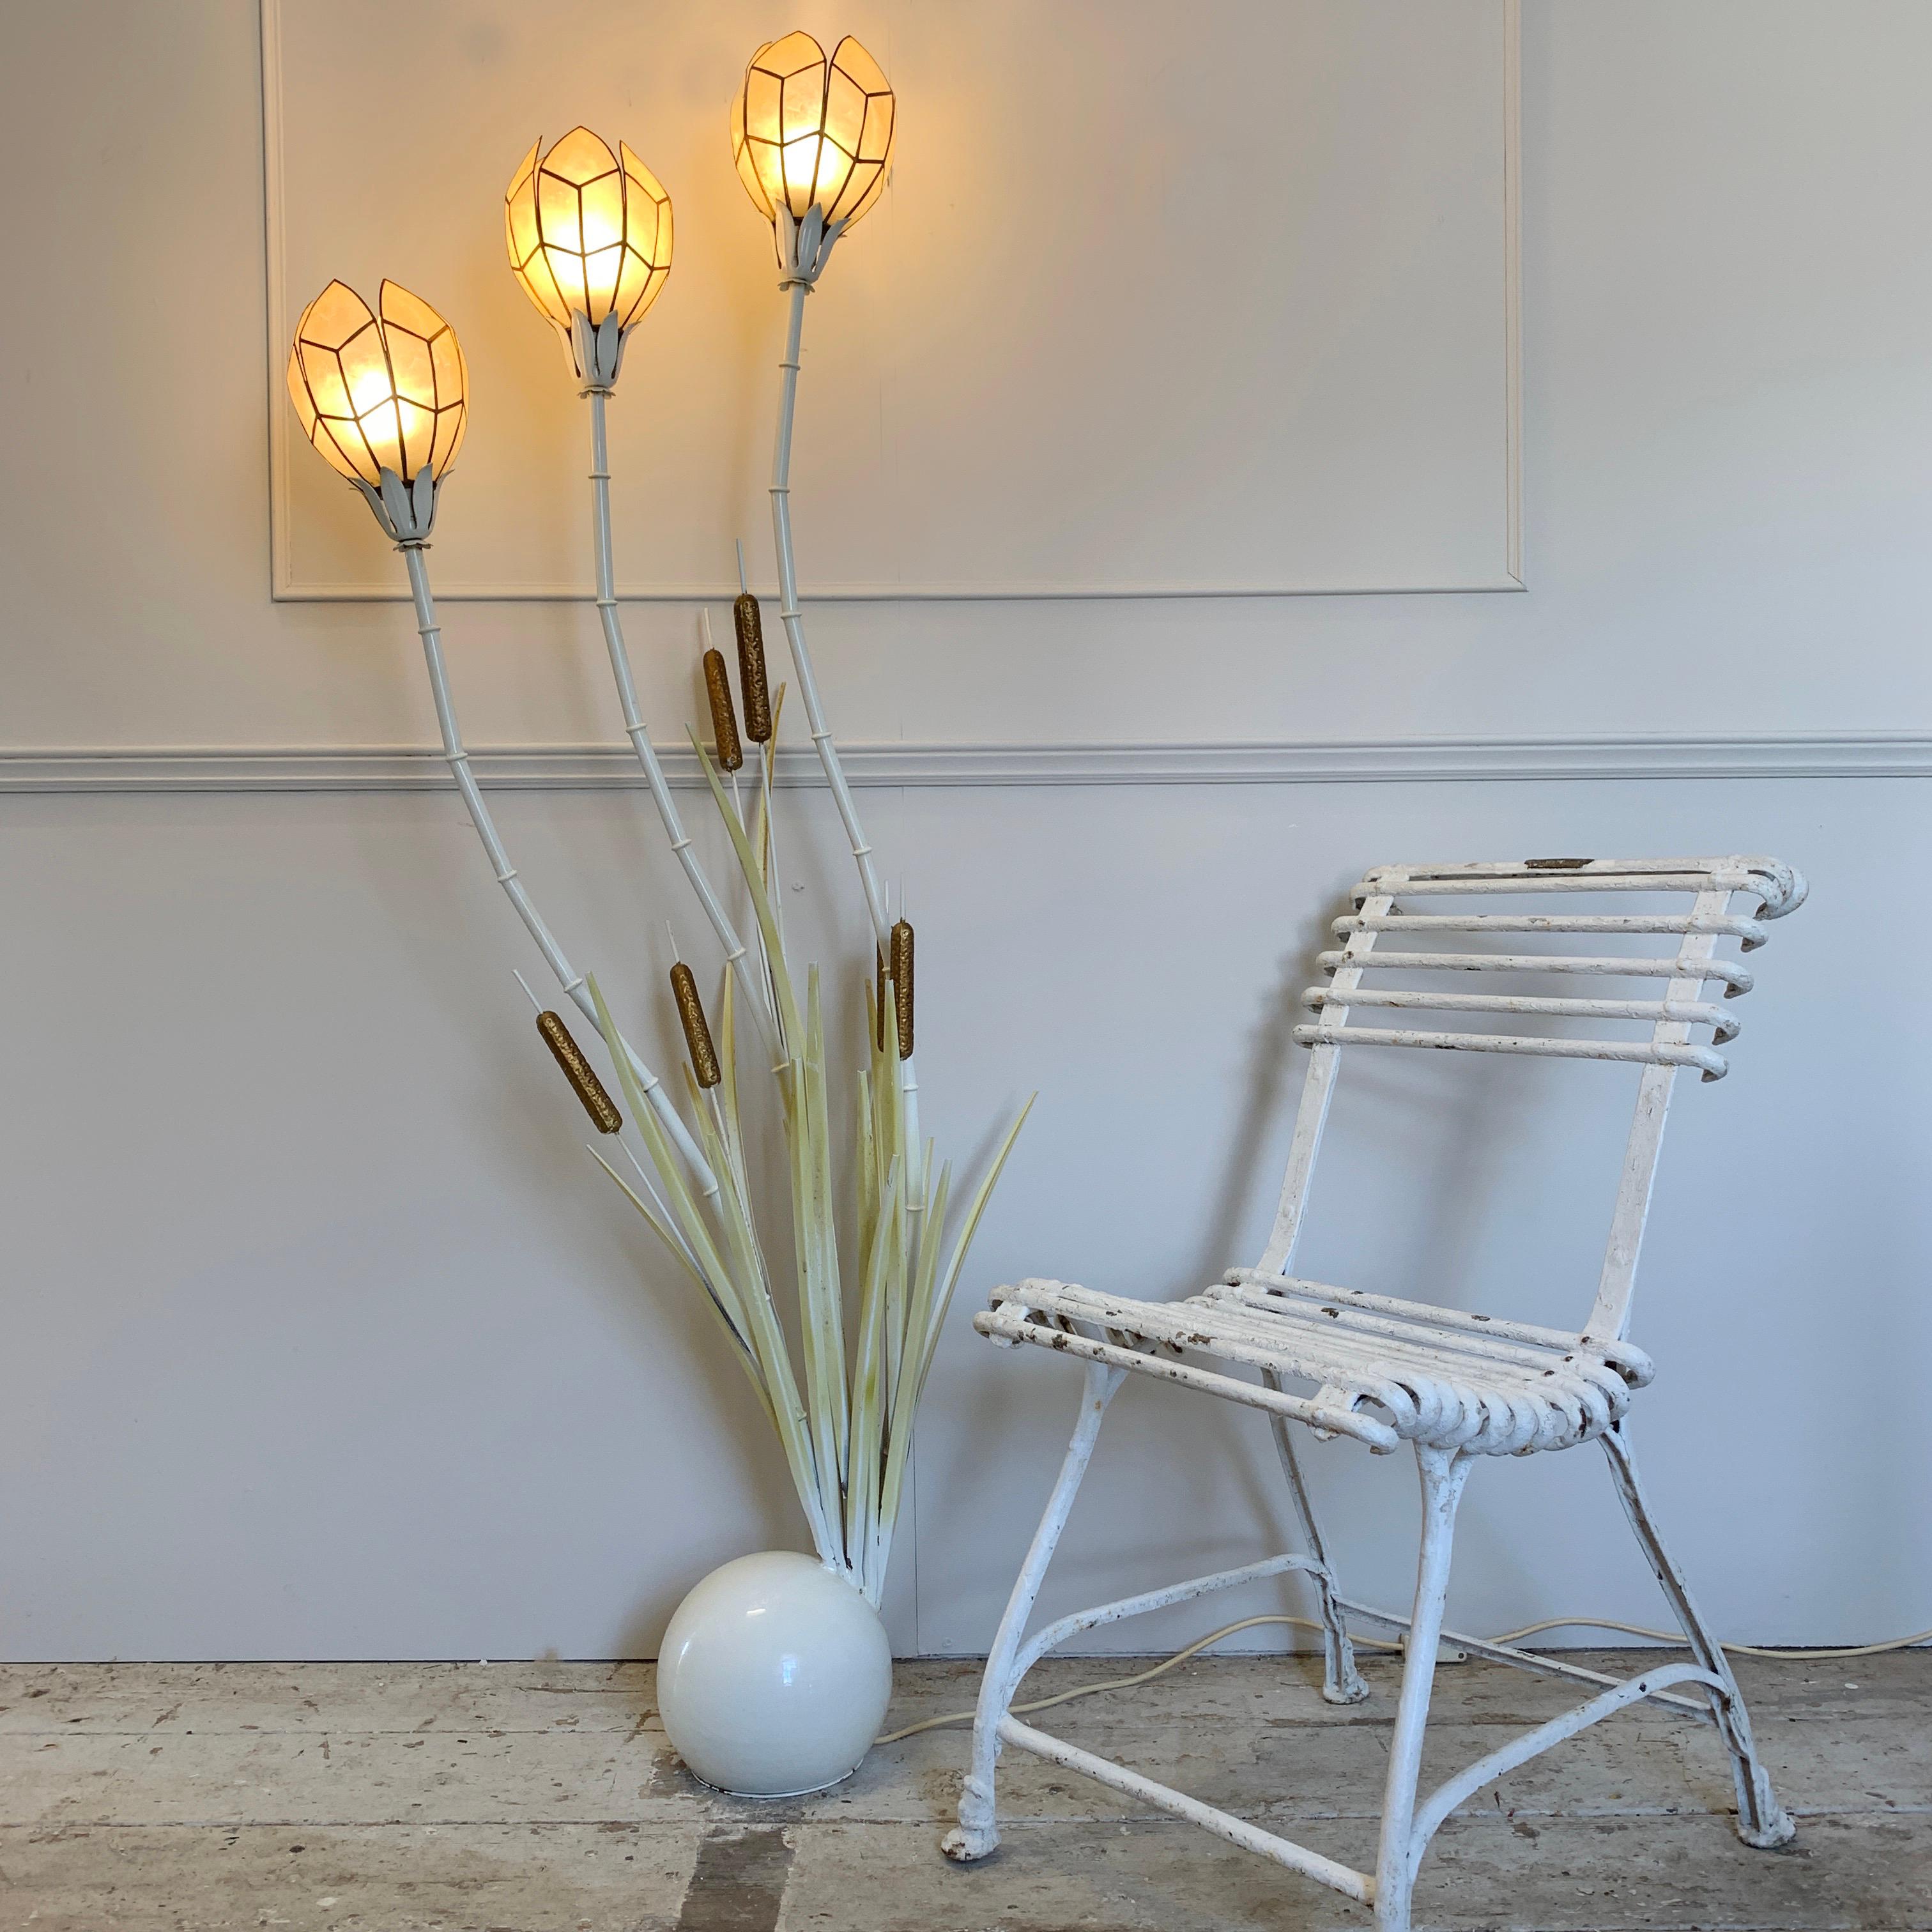 1980s faux bamboo and bulrush floor lamp with shell shades
An elegant large floor lamp depicting bamboo stems with bulrushes and leaves
The 3 bamboo stems have handcrafted metal and shell inlay shades, they give a beautiful soft glow
There is a